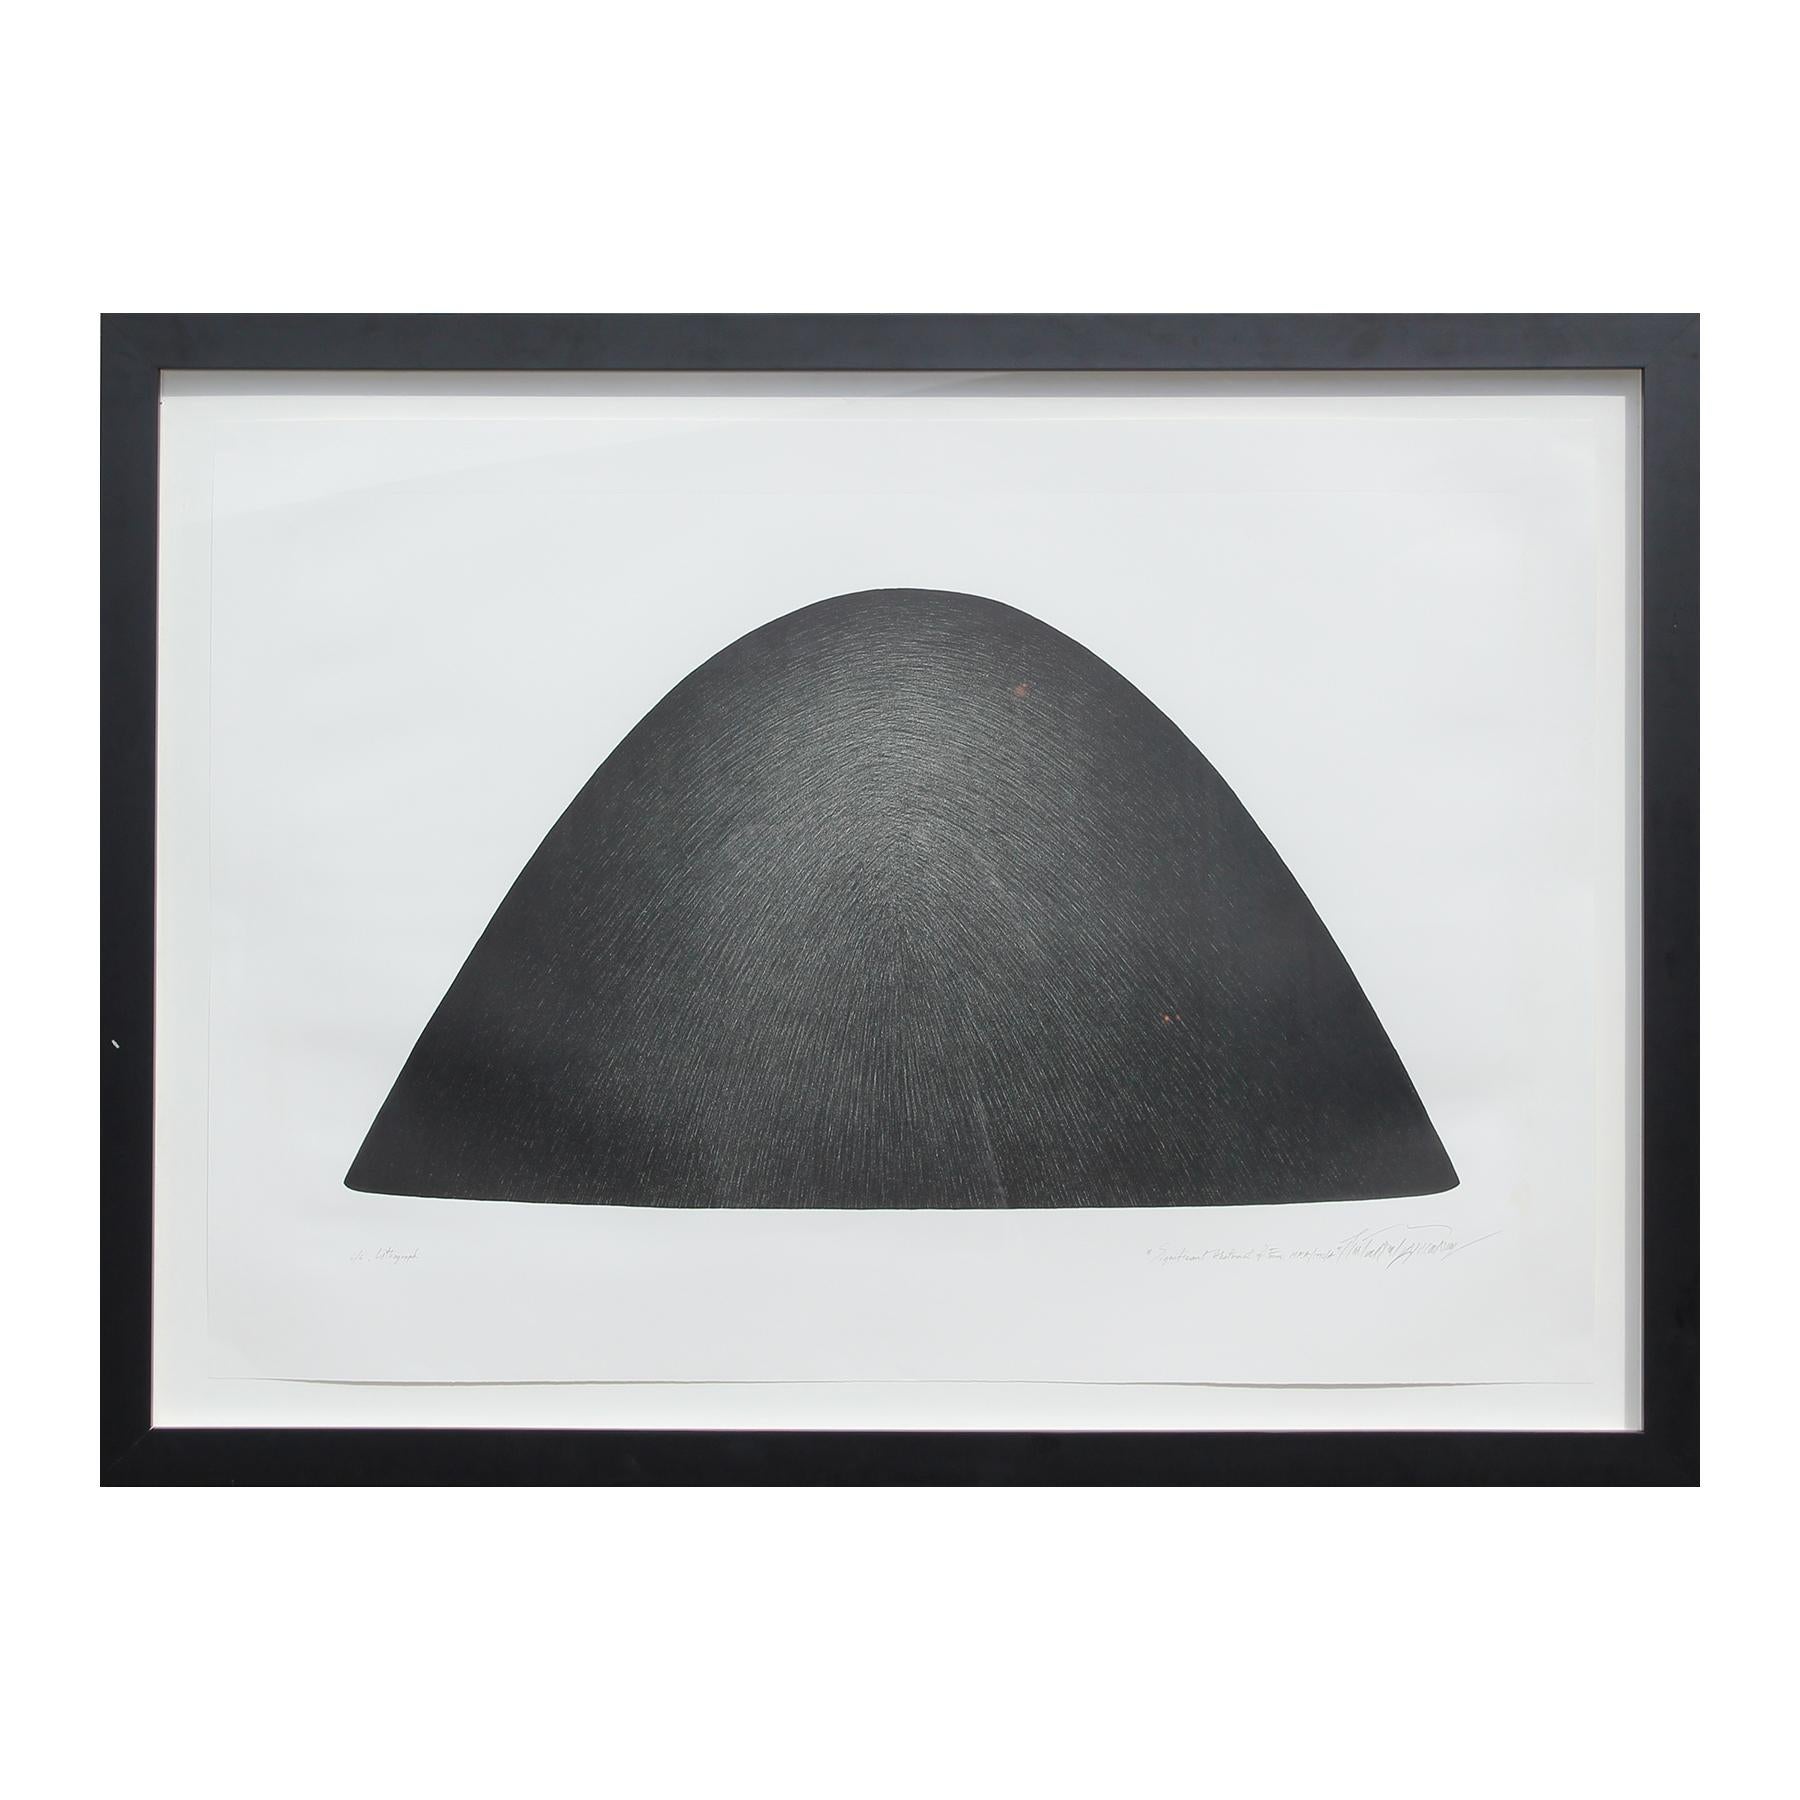 Phatyos Buddhacharoen Abstract Print - “Significant Abstract of Form M.F.A./92/A” Large Black Abstract Lithograph